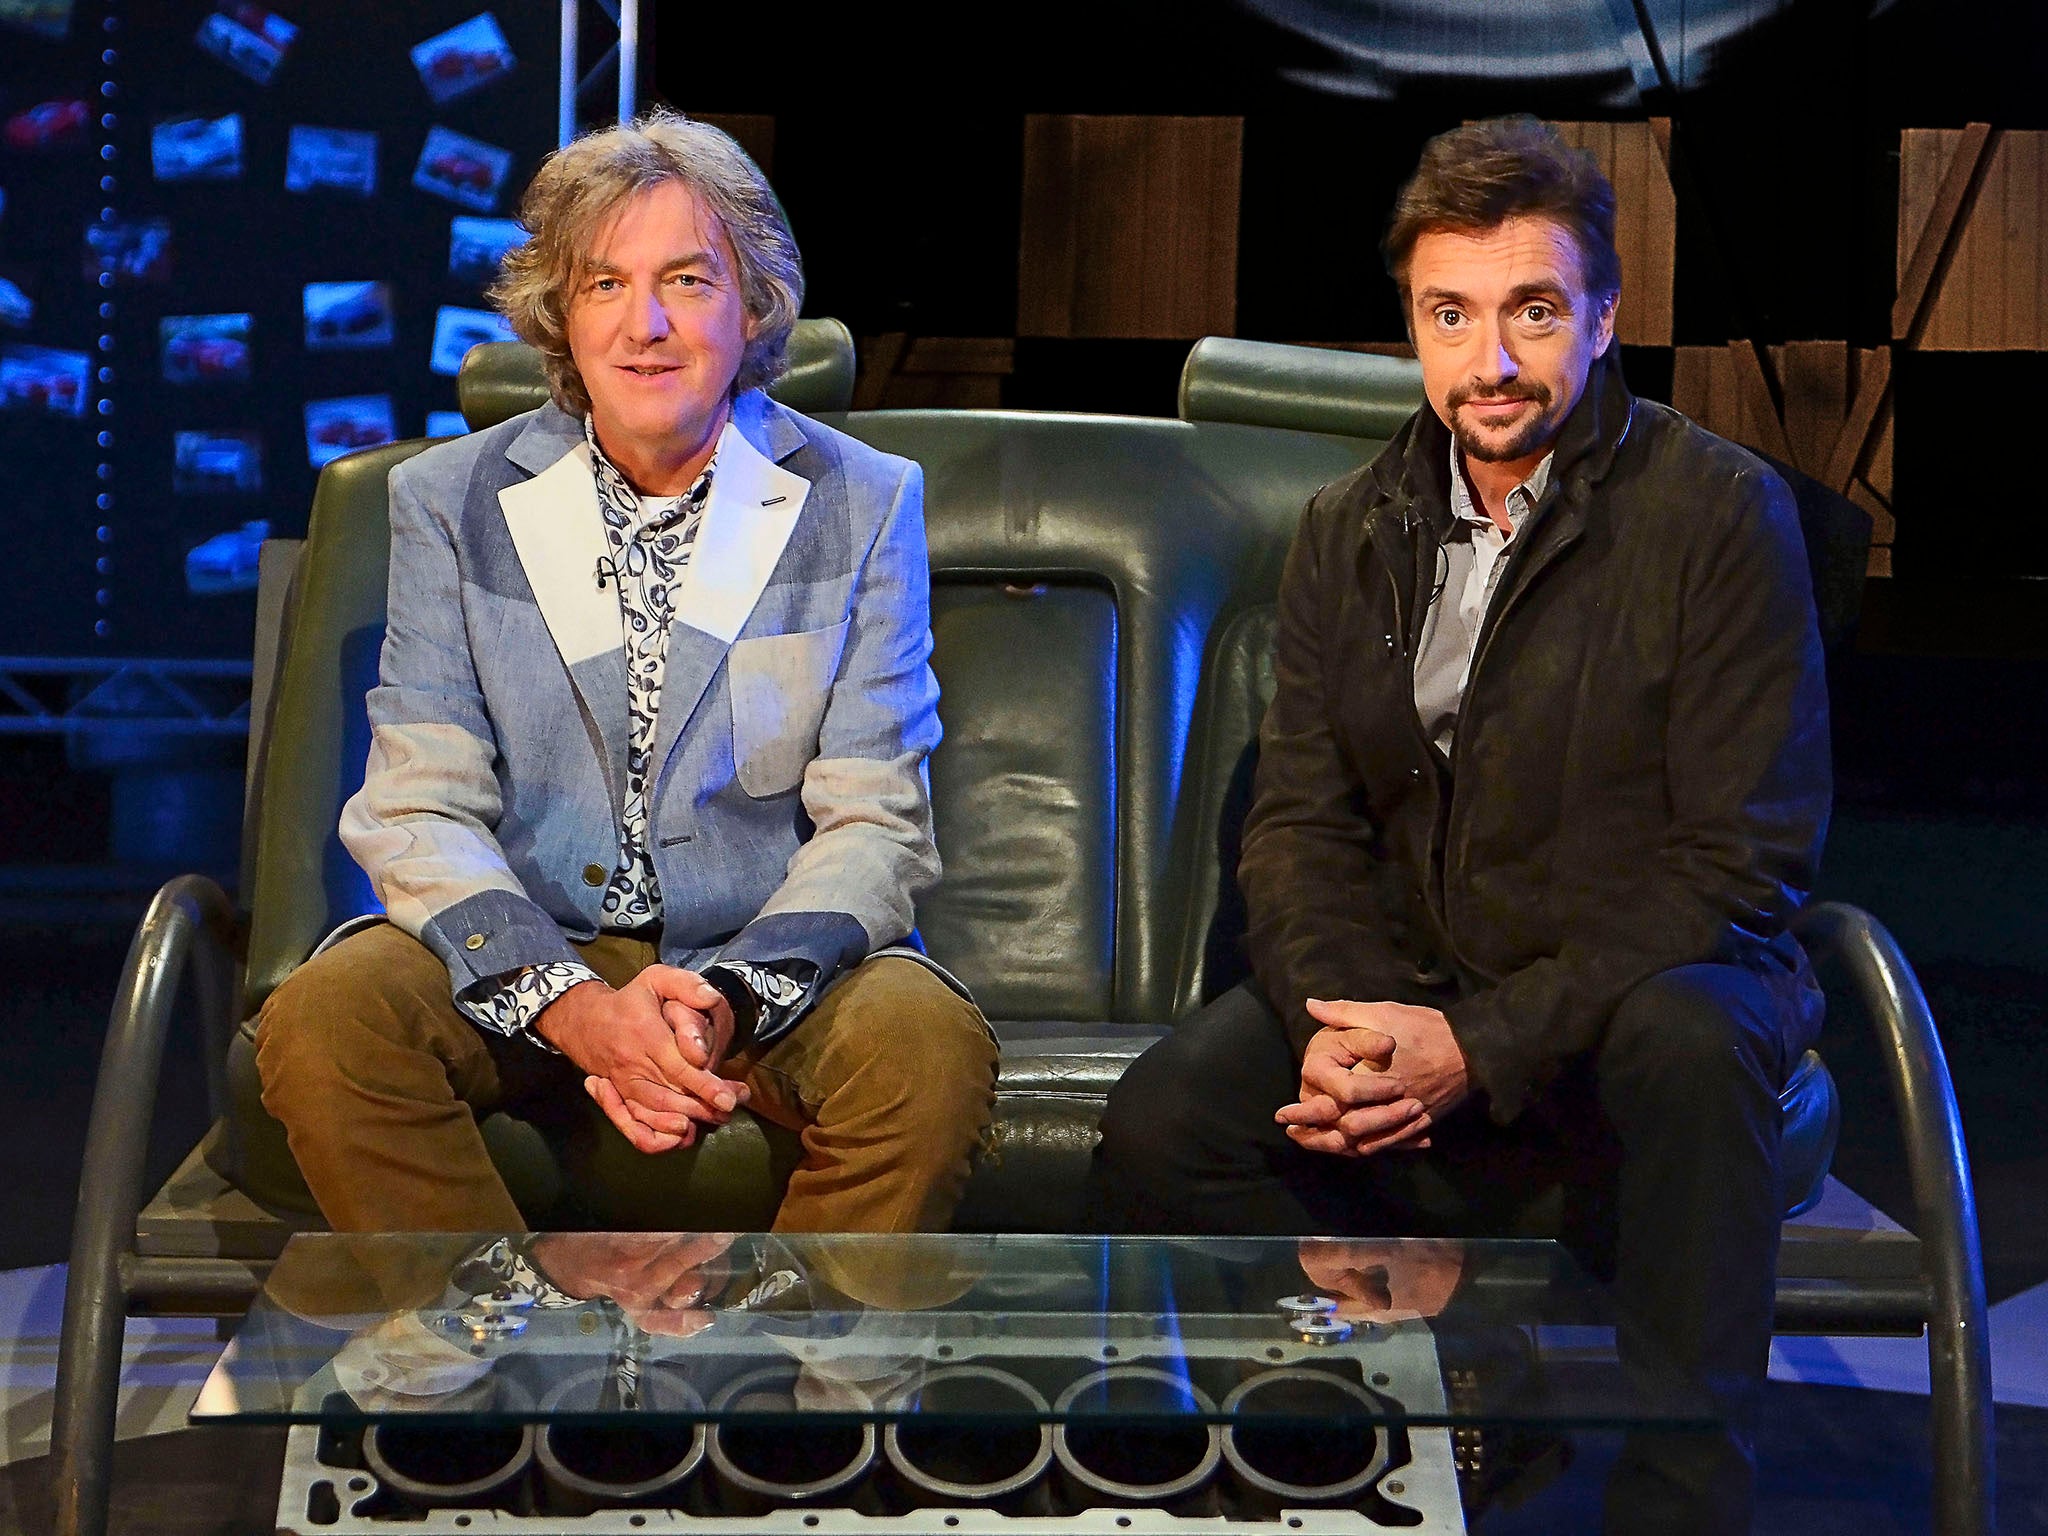 James May and Richard Hammond without Jeremy Clarkson in the studio